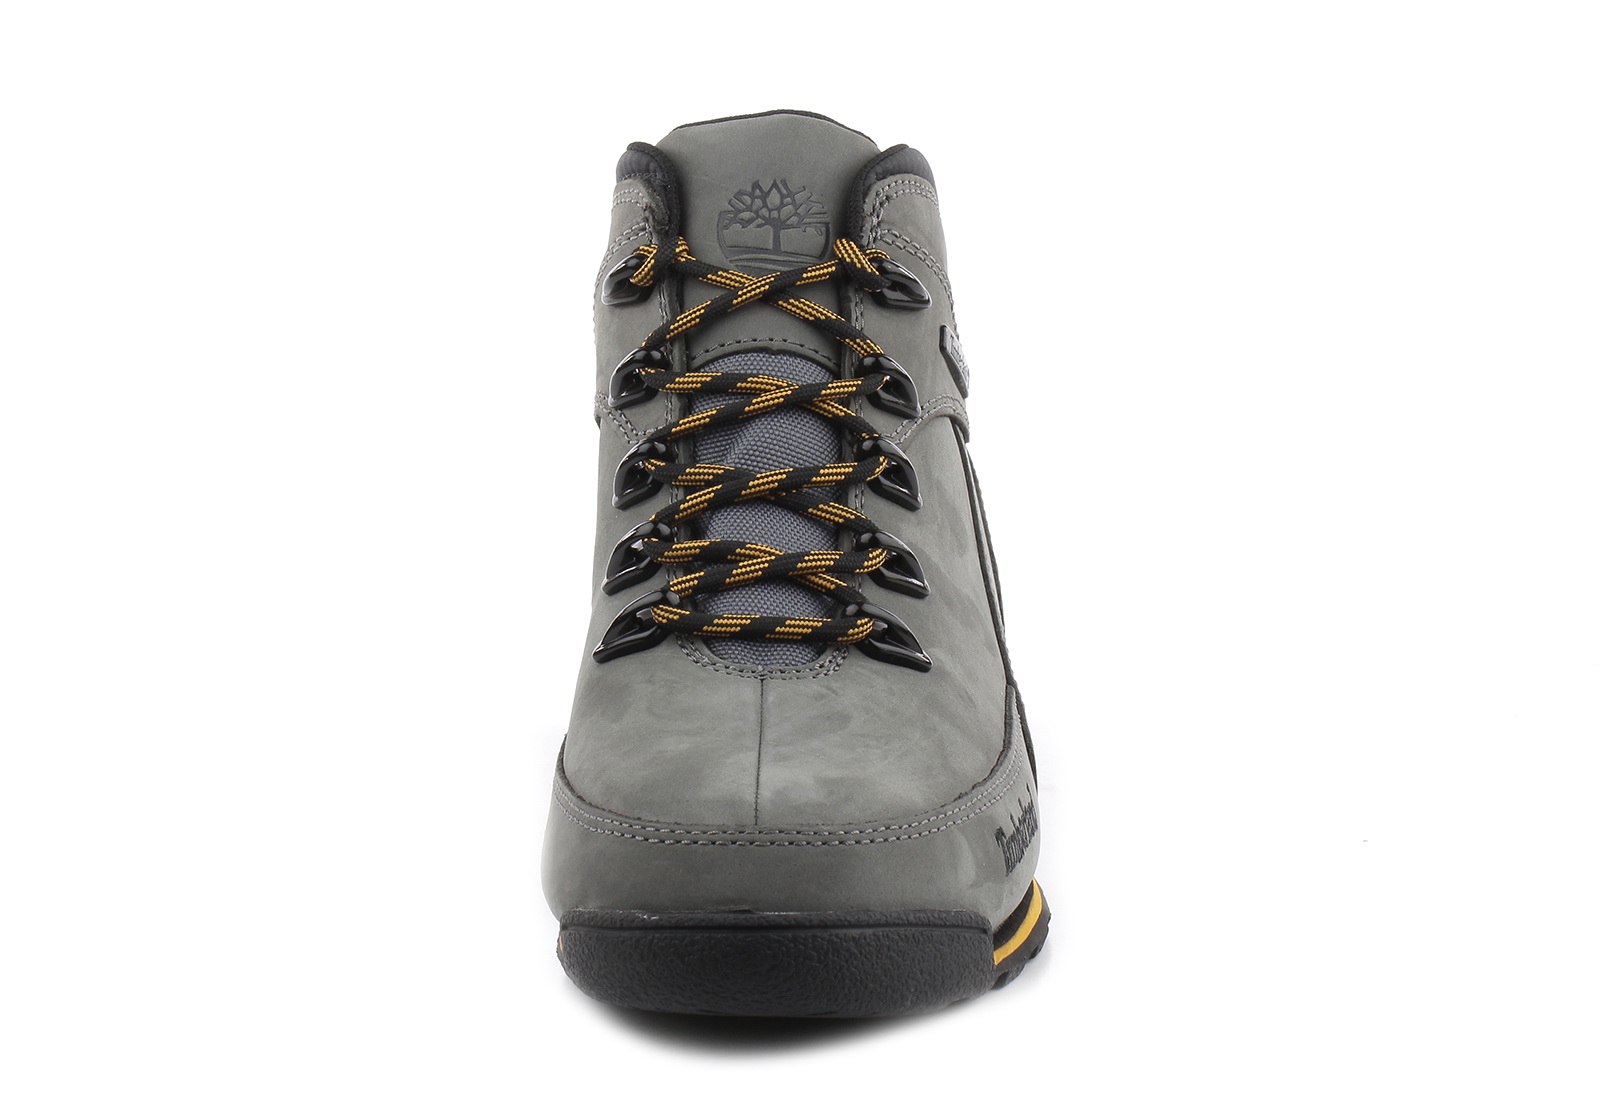 Timberland Hikers - Euro Rock Hiker - A2JDG-GRY - Online shop for ...